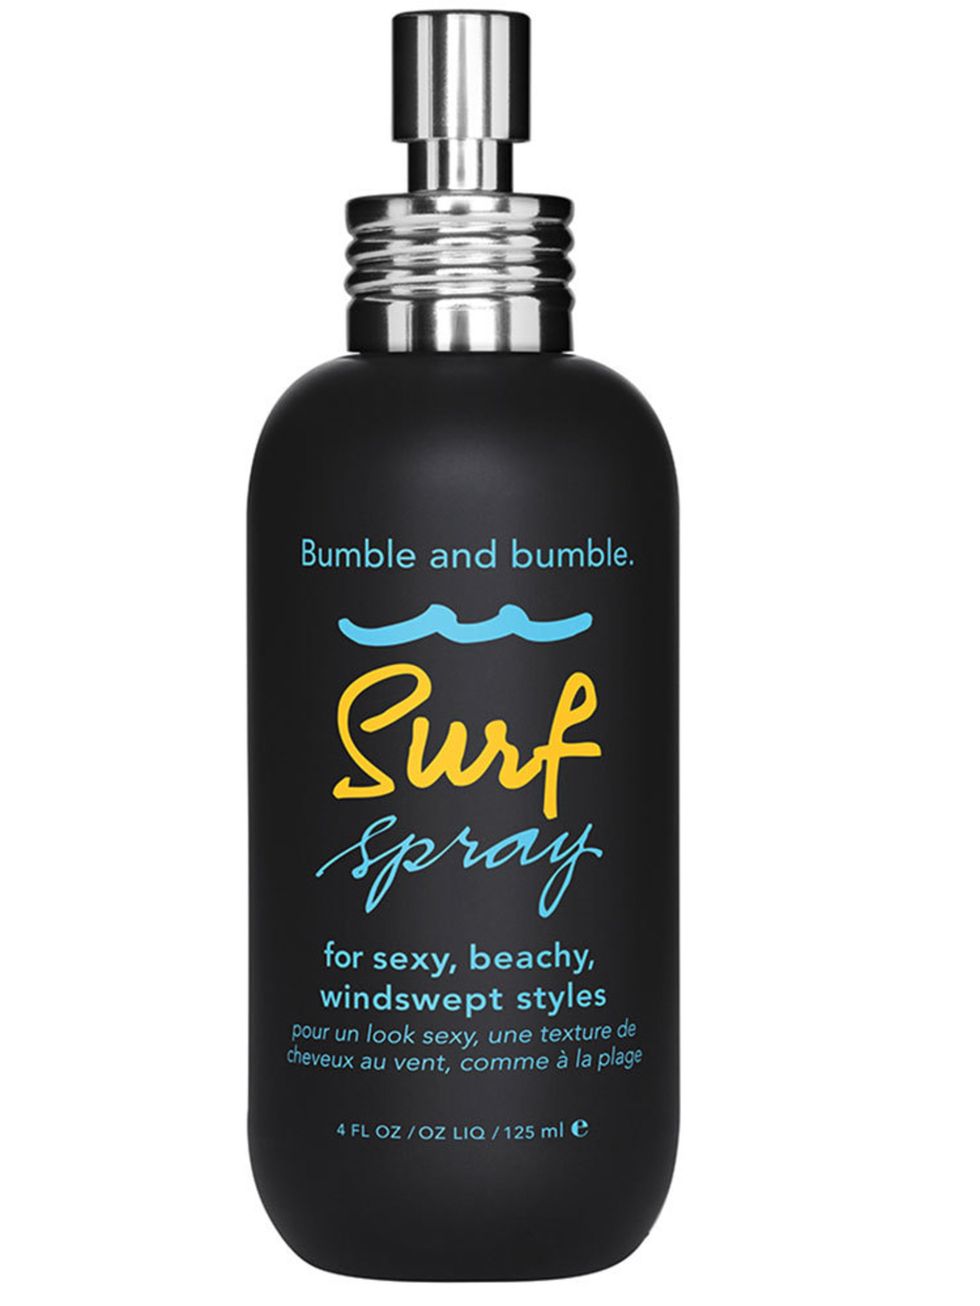 <p><a href="http://www.boots.com/en/Bumble-and-bumble-Surf-Spray-50ml_1276795/?cm_mmc=pla-_-google-_-PLAs-_-Boots+Shopping+-+Category+-+Beauty" target="_blank">Bumble and Bumble Surf Spray, £9.50</a></p>

<p>A backstage regular and our go-to for creating 